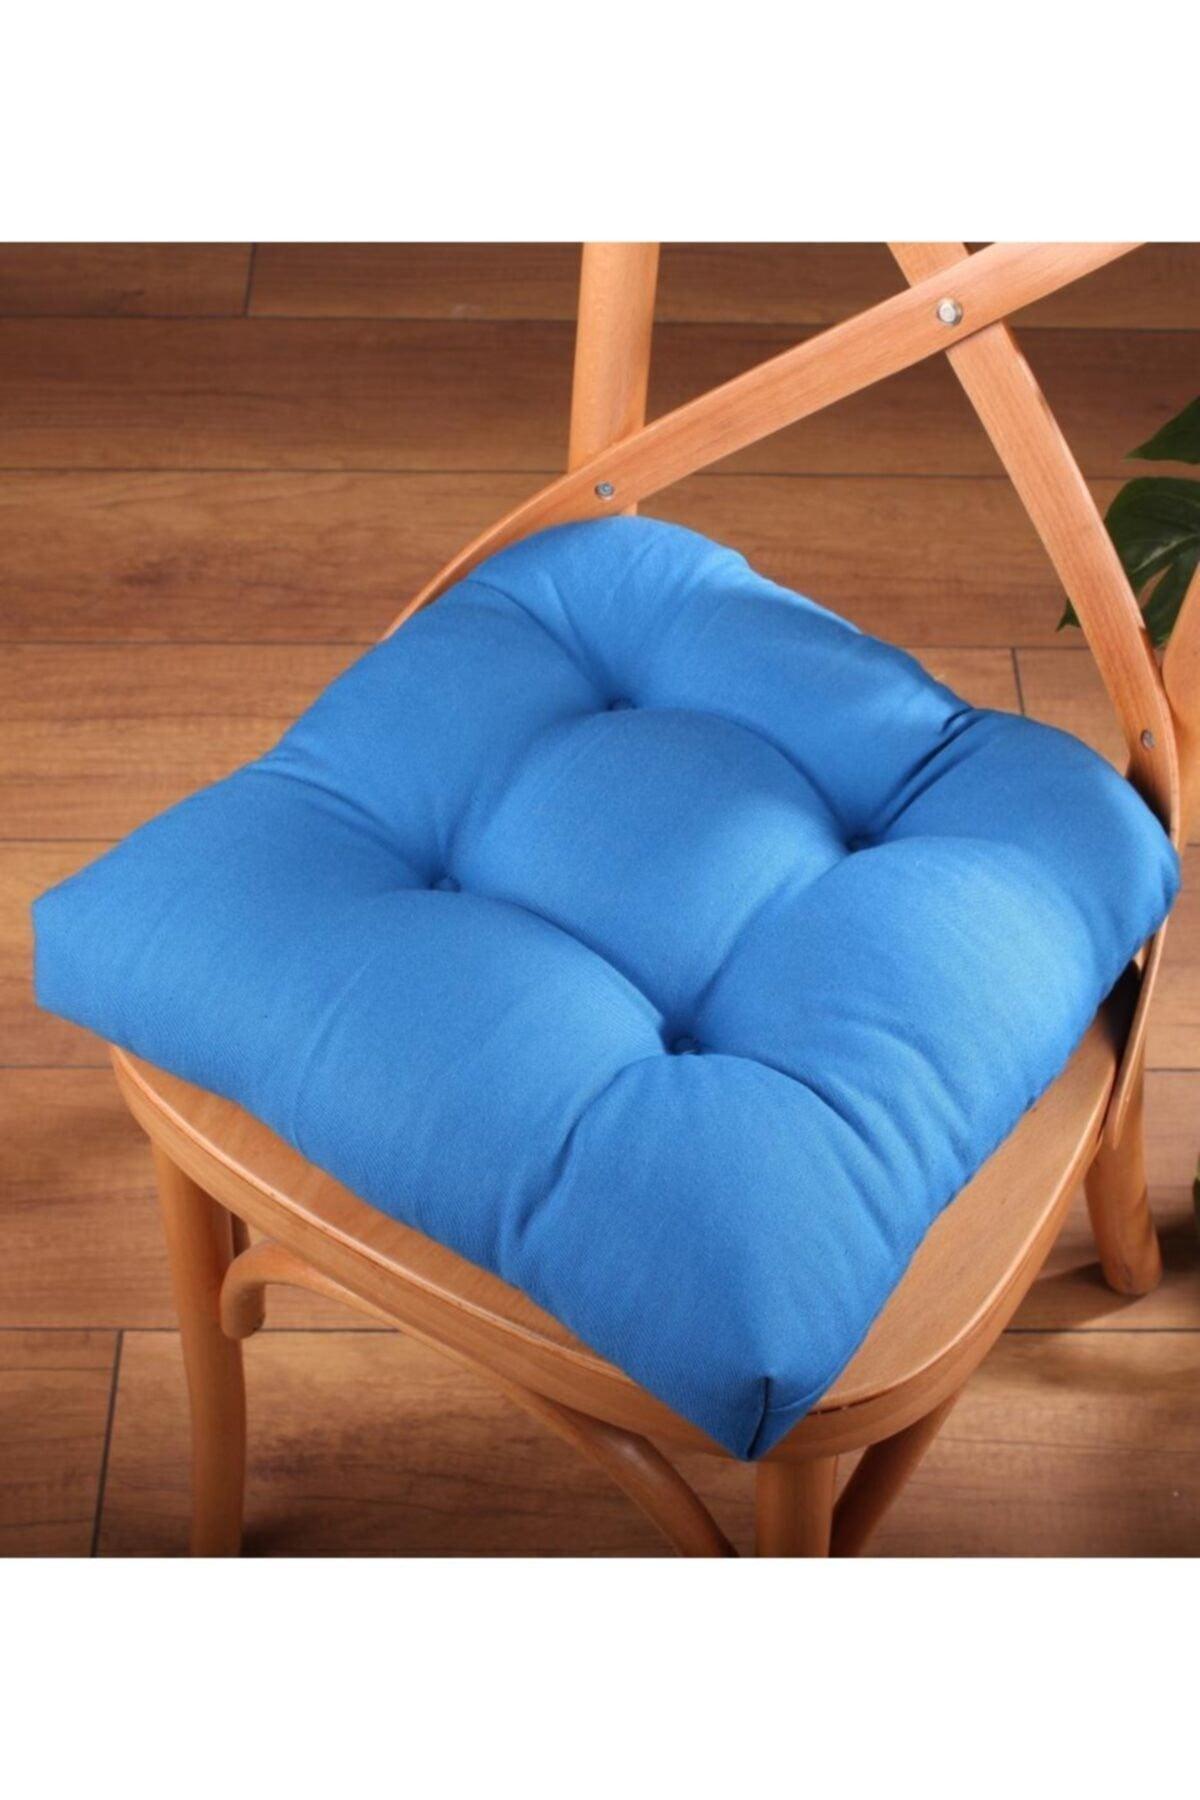 Lux Pofidik Blue Chair Cushion Special Stitched Laced 40x40cm - Swordslife